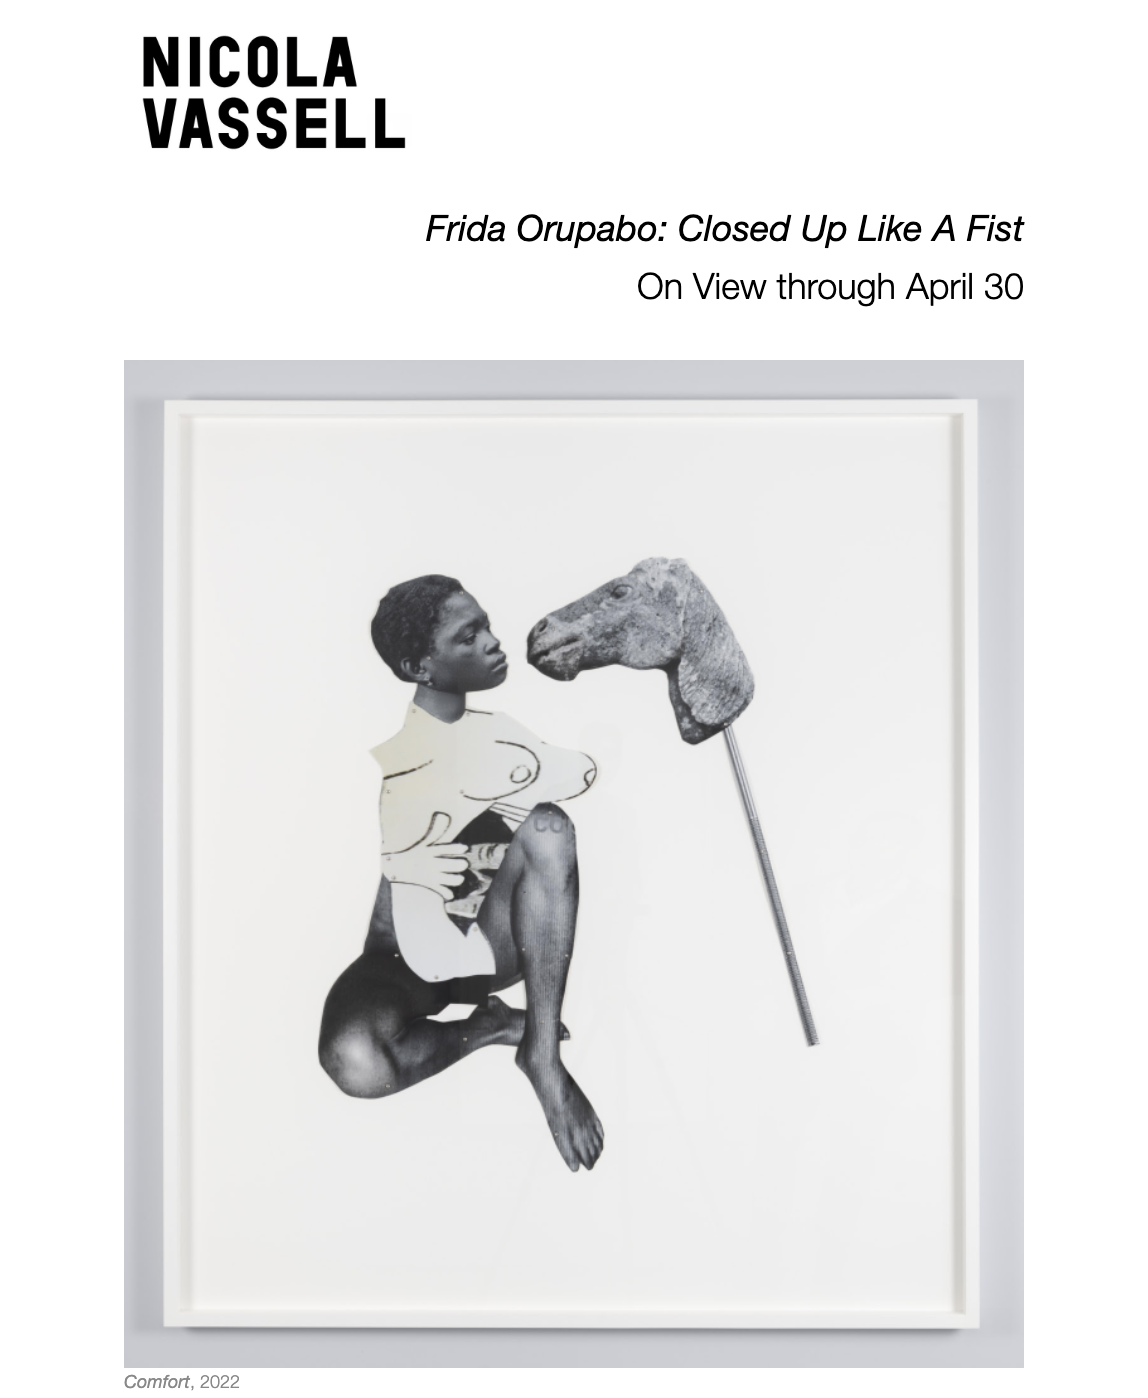 Thumbnail of Exhibition: Frida Orupabo’s solo show at Nicola Vassell Gallery, Closed Up Like a Fist